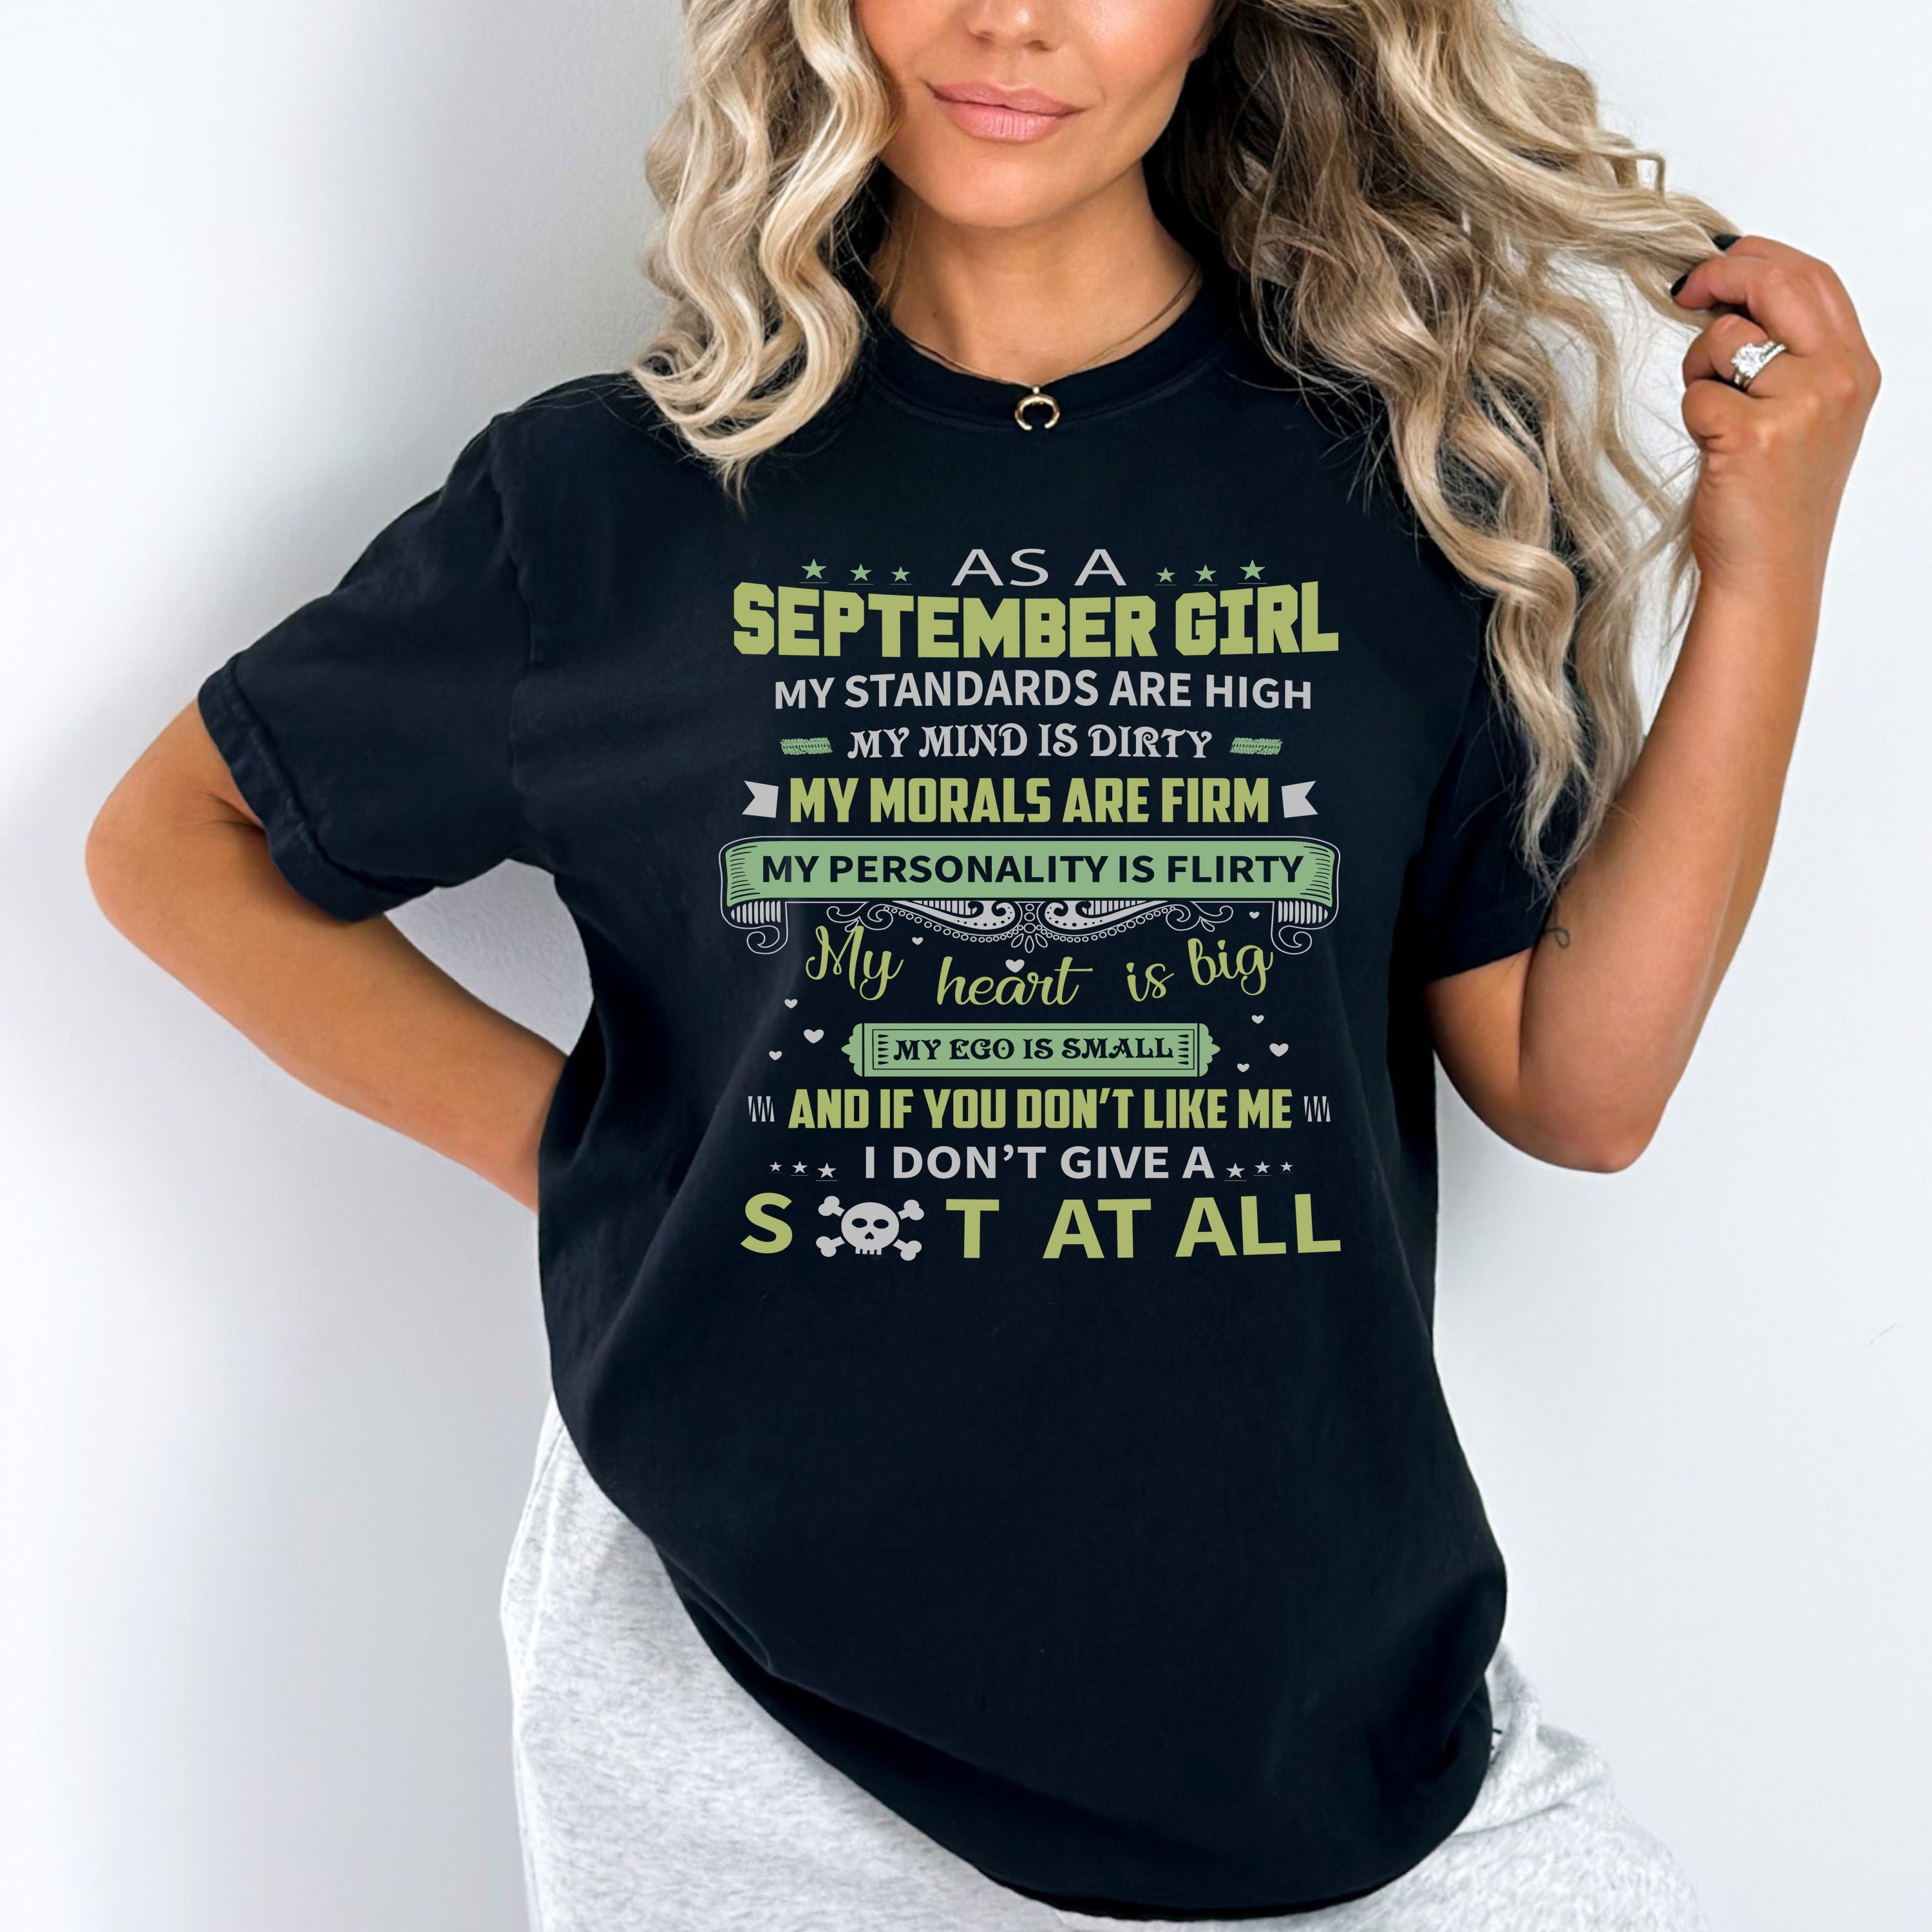 "As A September Girl My Standards Are High"